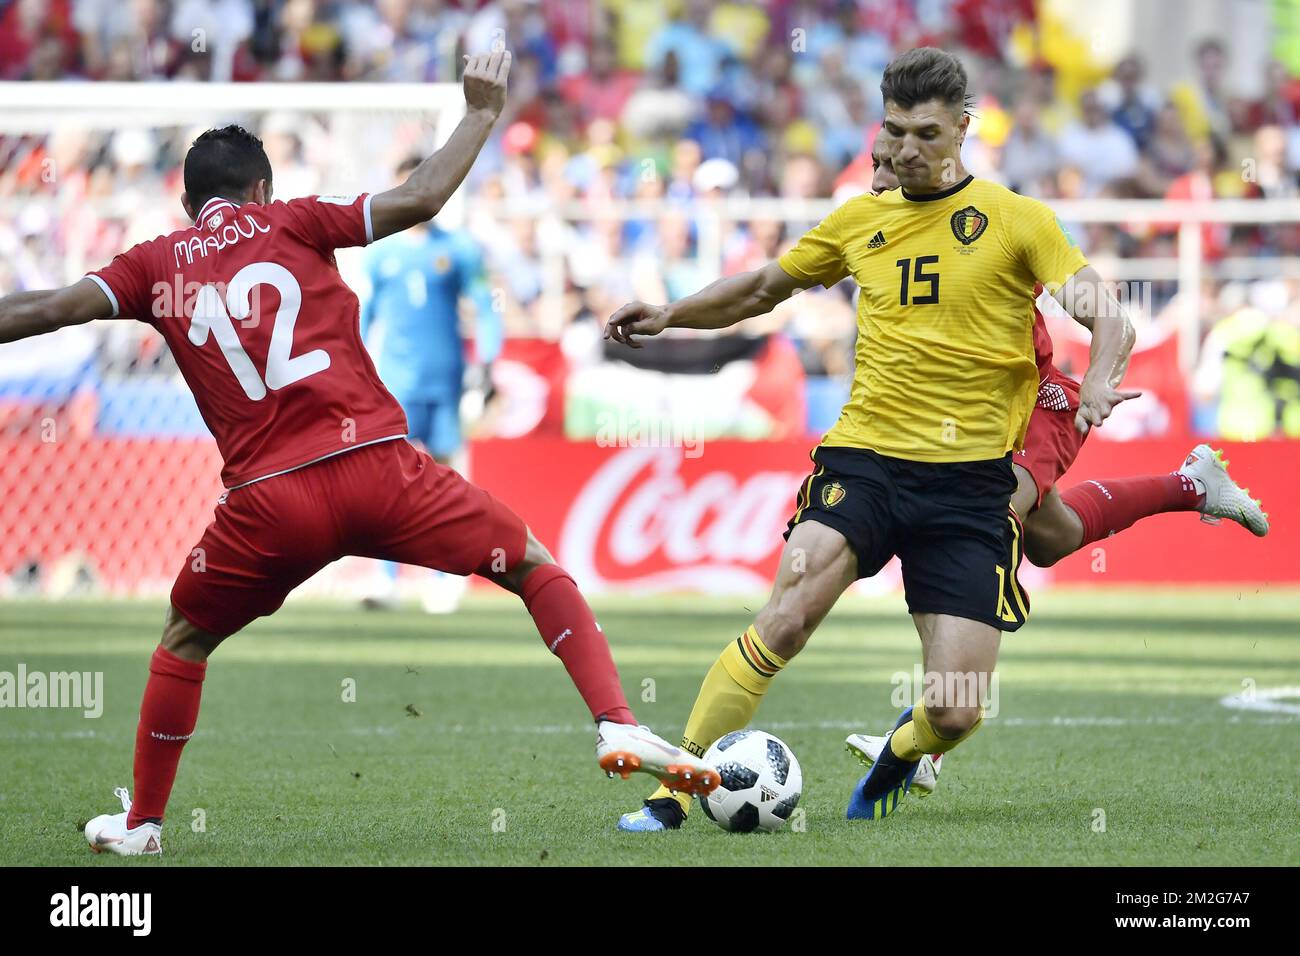 Tunesia's Ali Maaloul and Belgium's Thomas Meunier fight for the ball during the second game of Belgian national soccer team the Red Devils against Tunisia national team in the Spartak stadium, in Moscow, Russia, Saturday 23 June 2018. Belgium won its first group phase game. BELGA PHOTO DIRK WAEM Stock Photo